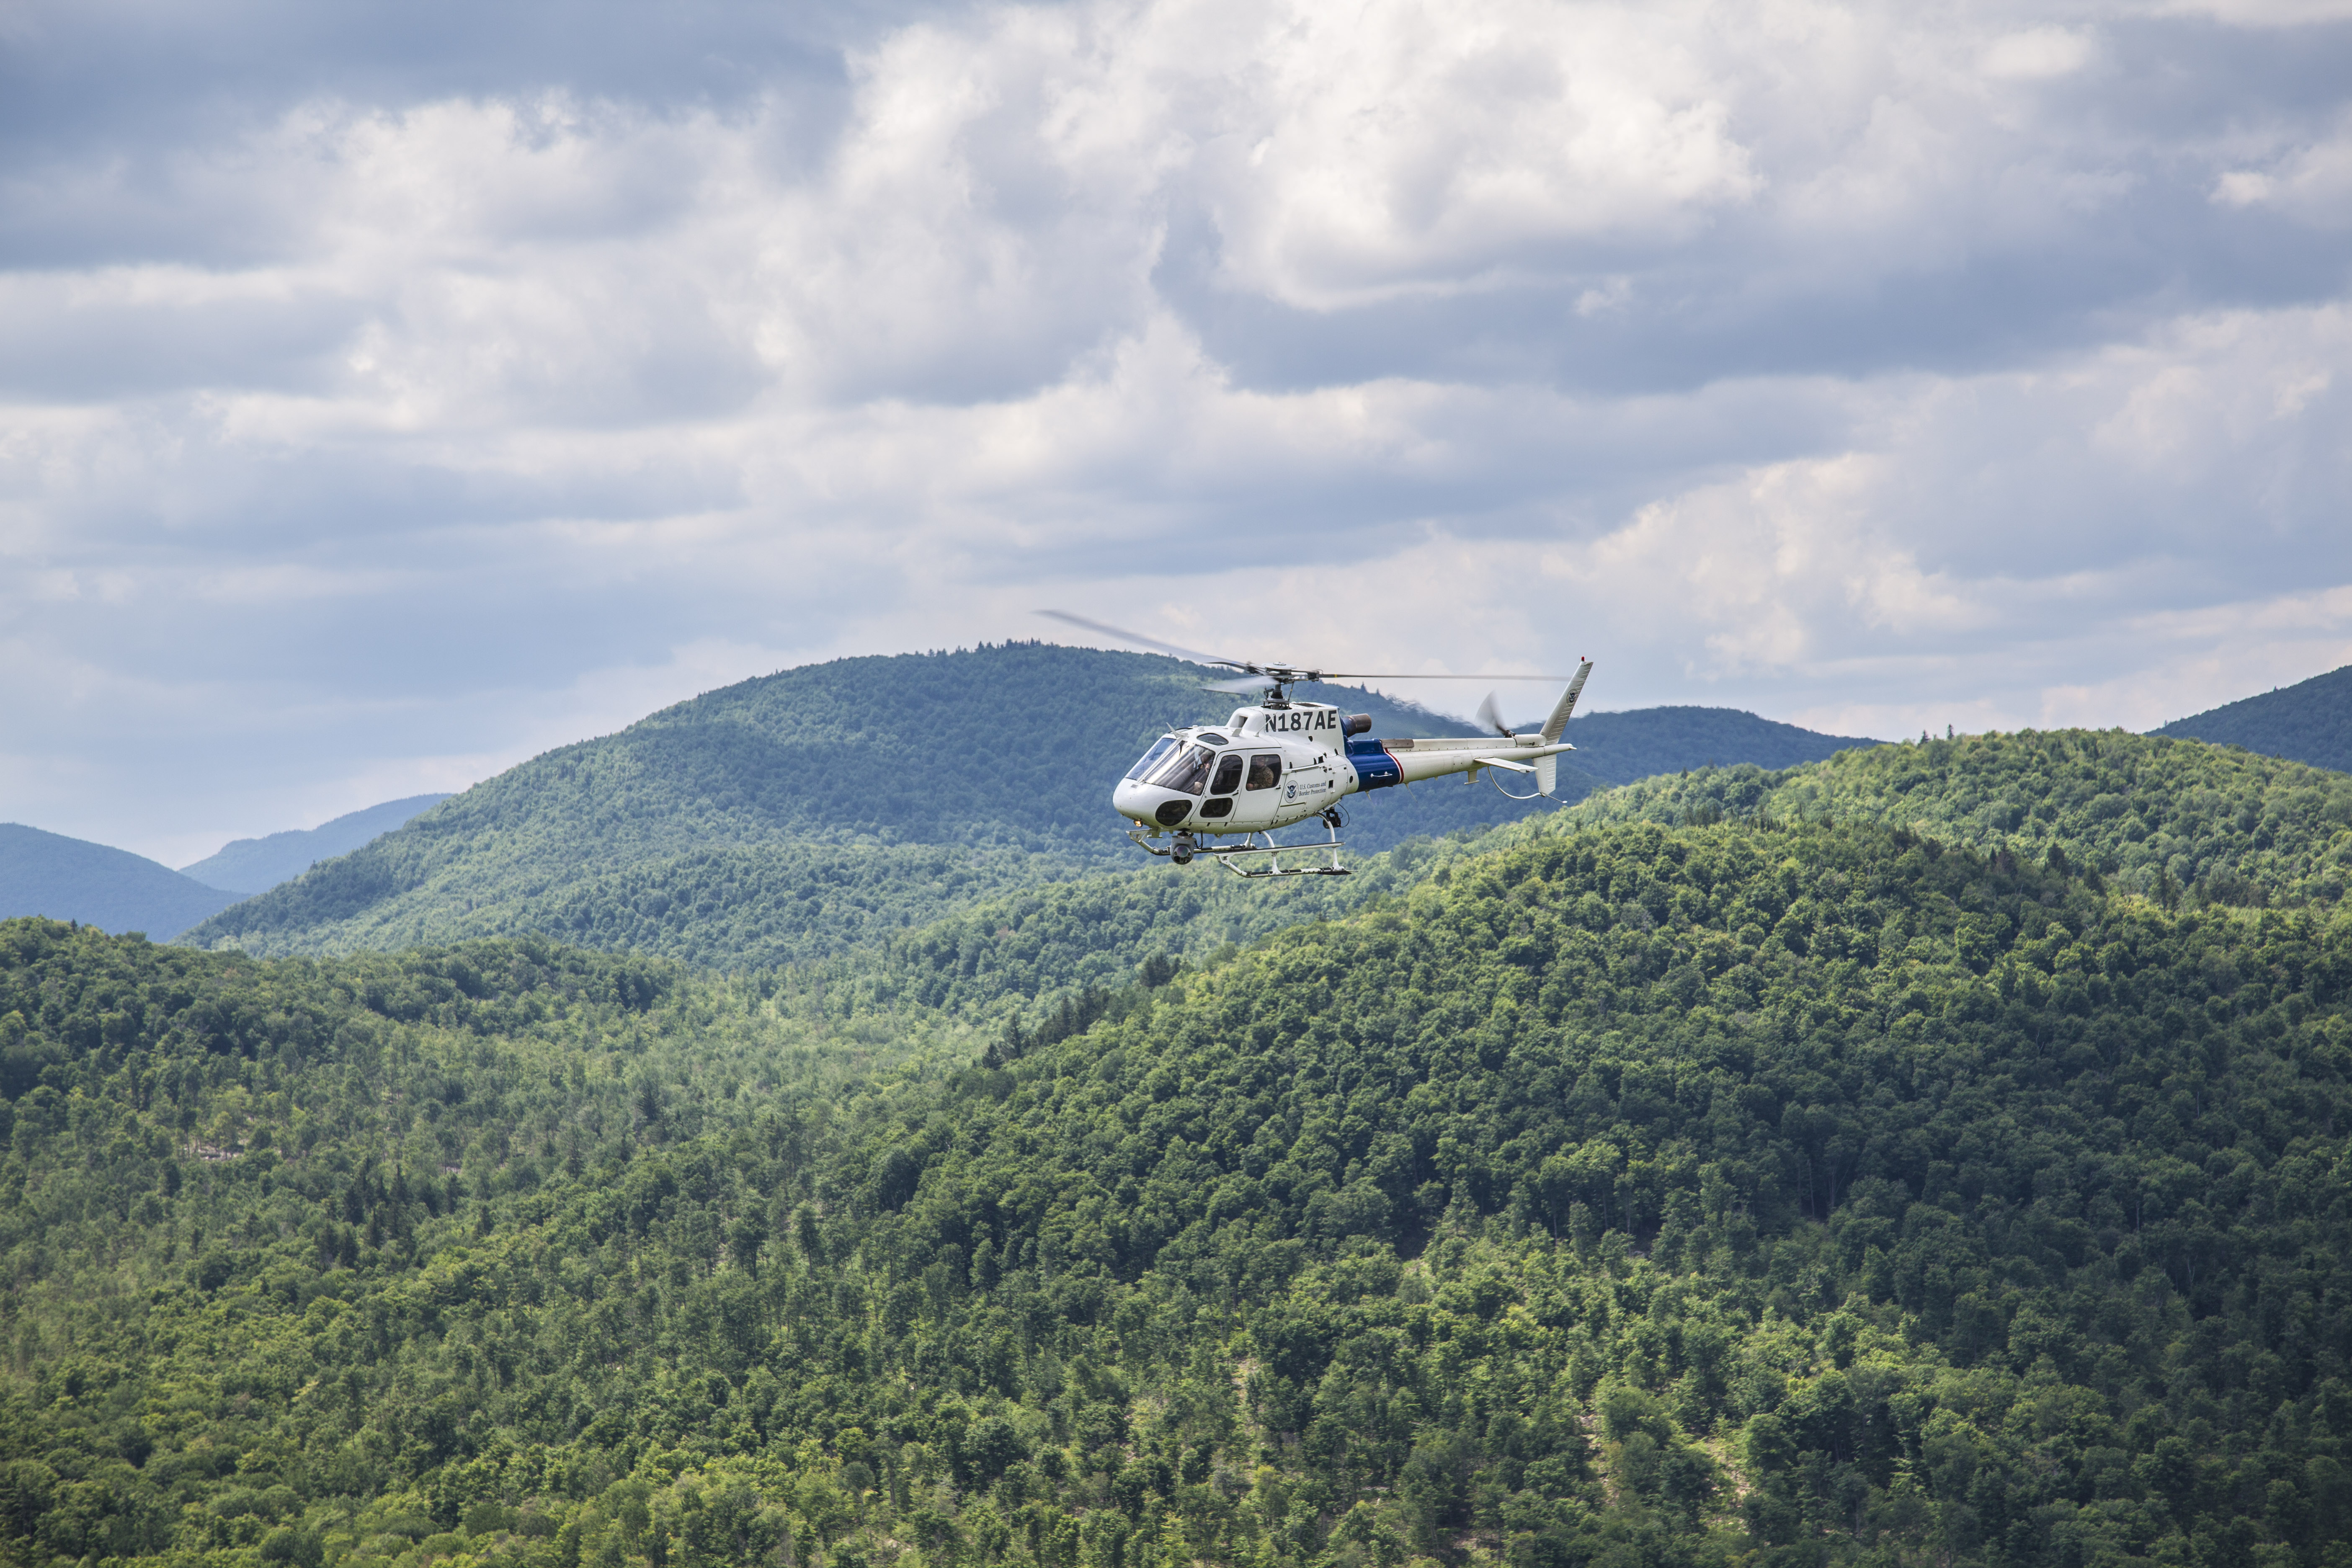  An AS350 crew assists in the hunt for escaped prisoners Richard Matt and David Sweat in upstate in NY.